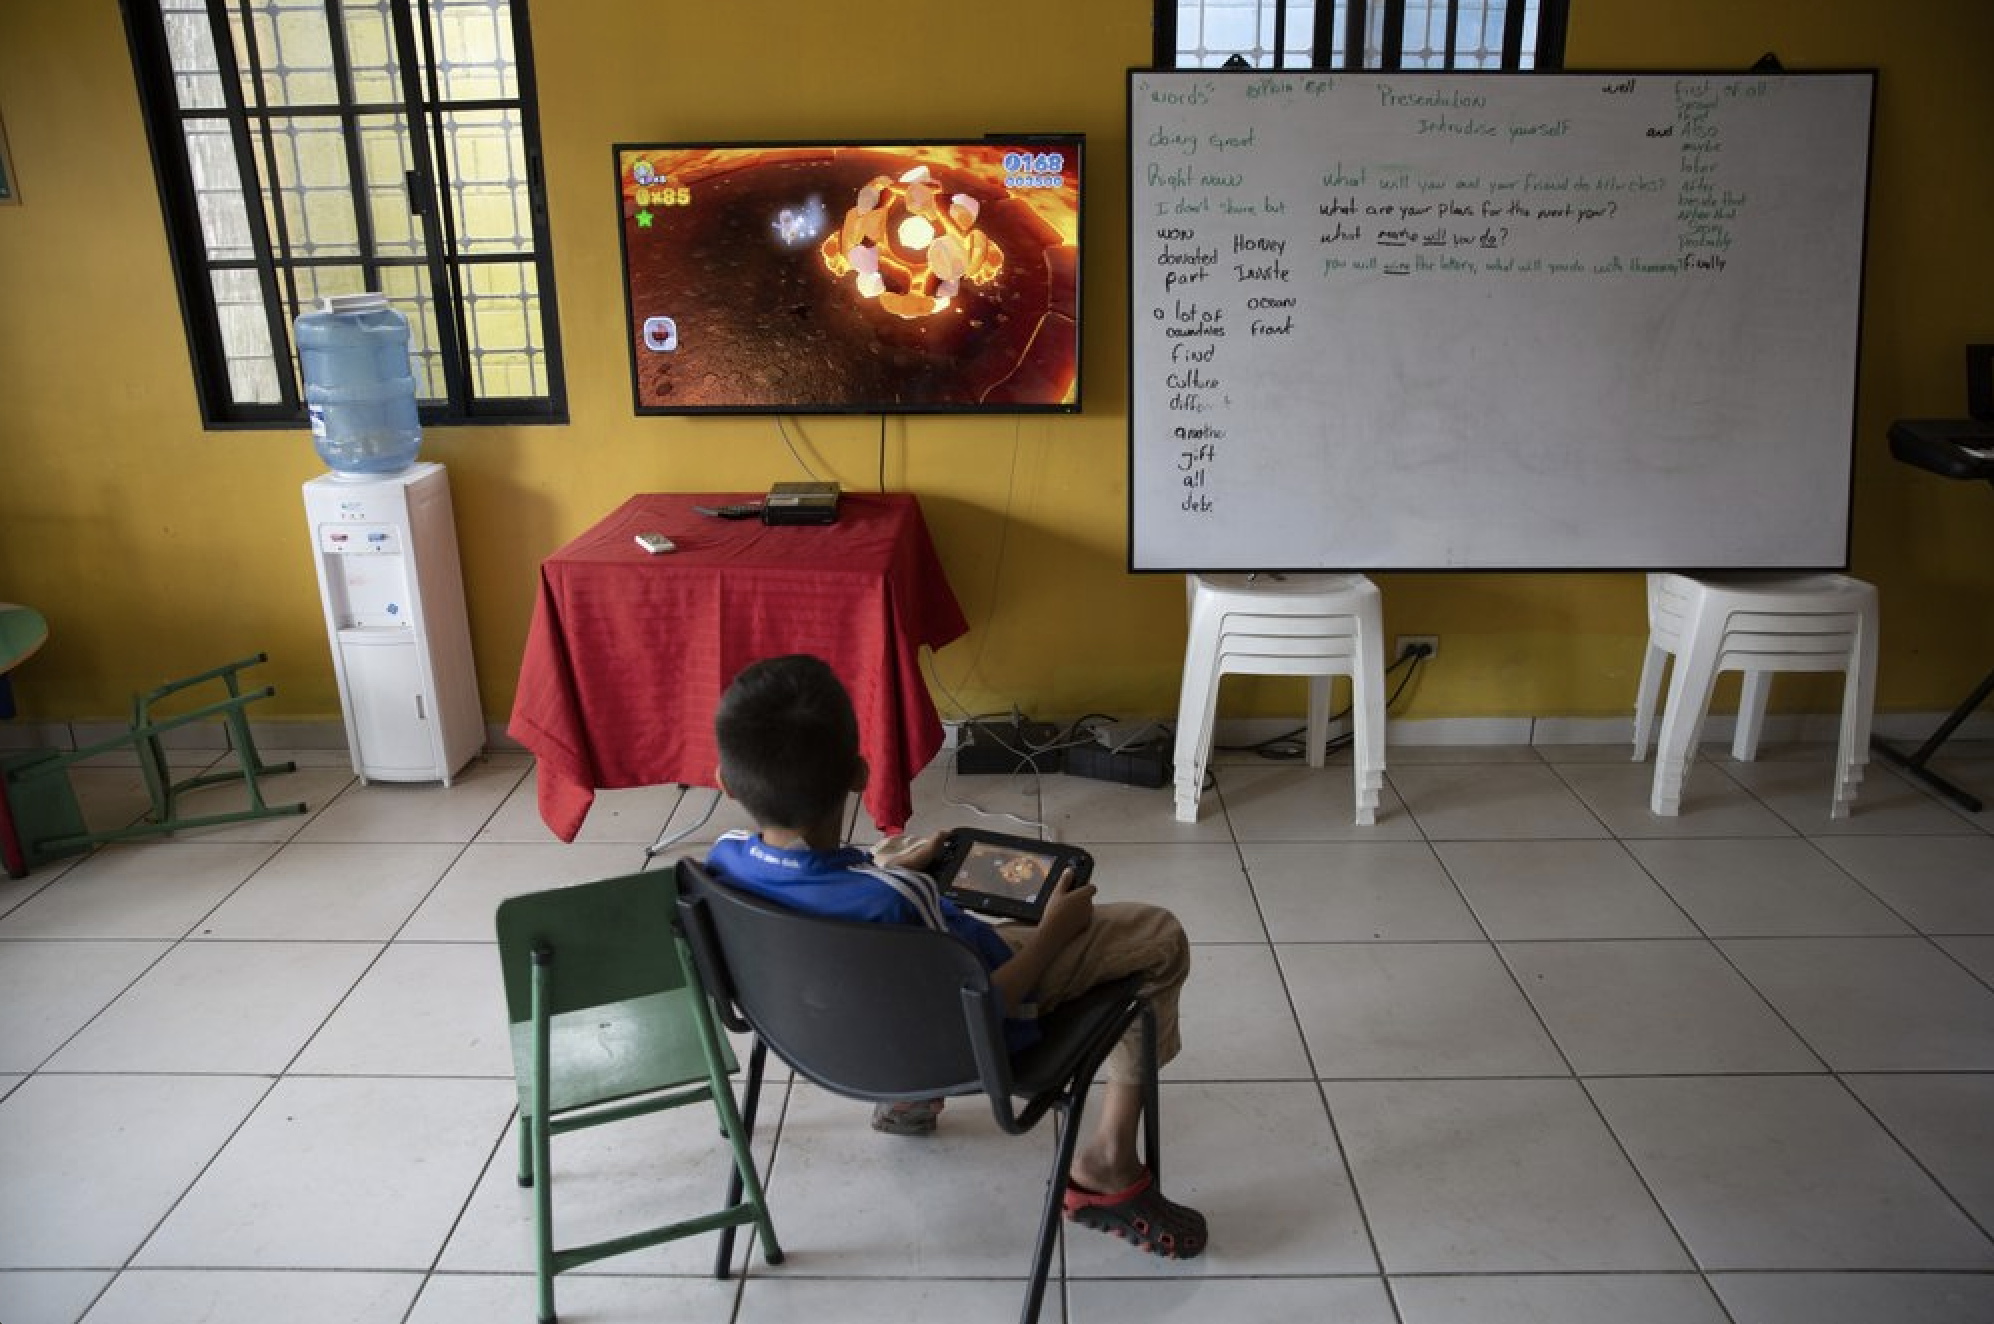 A boy plays video games inside a help center for young people living in dangerous zones, in the Rivera Hernandez neighborhood of San Pedro Sula, Honduras, on Dec. 2, 2019. Image by Moises Castillo/ AP Photo. Honduras, 2019.